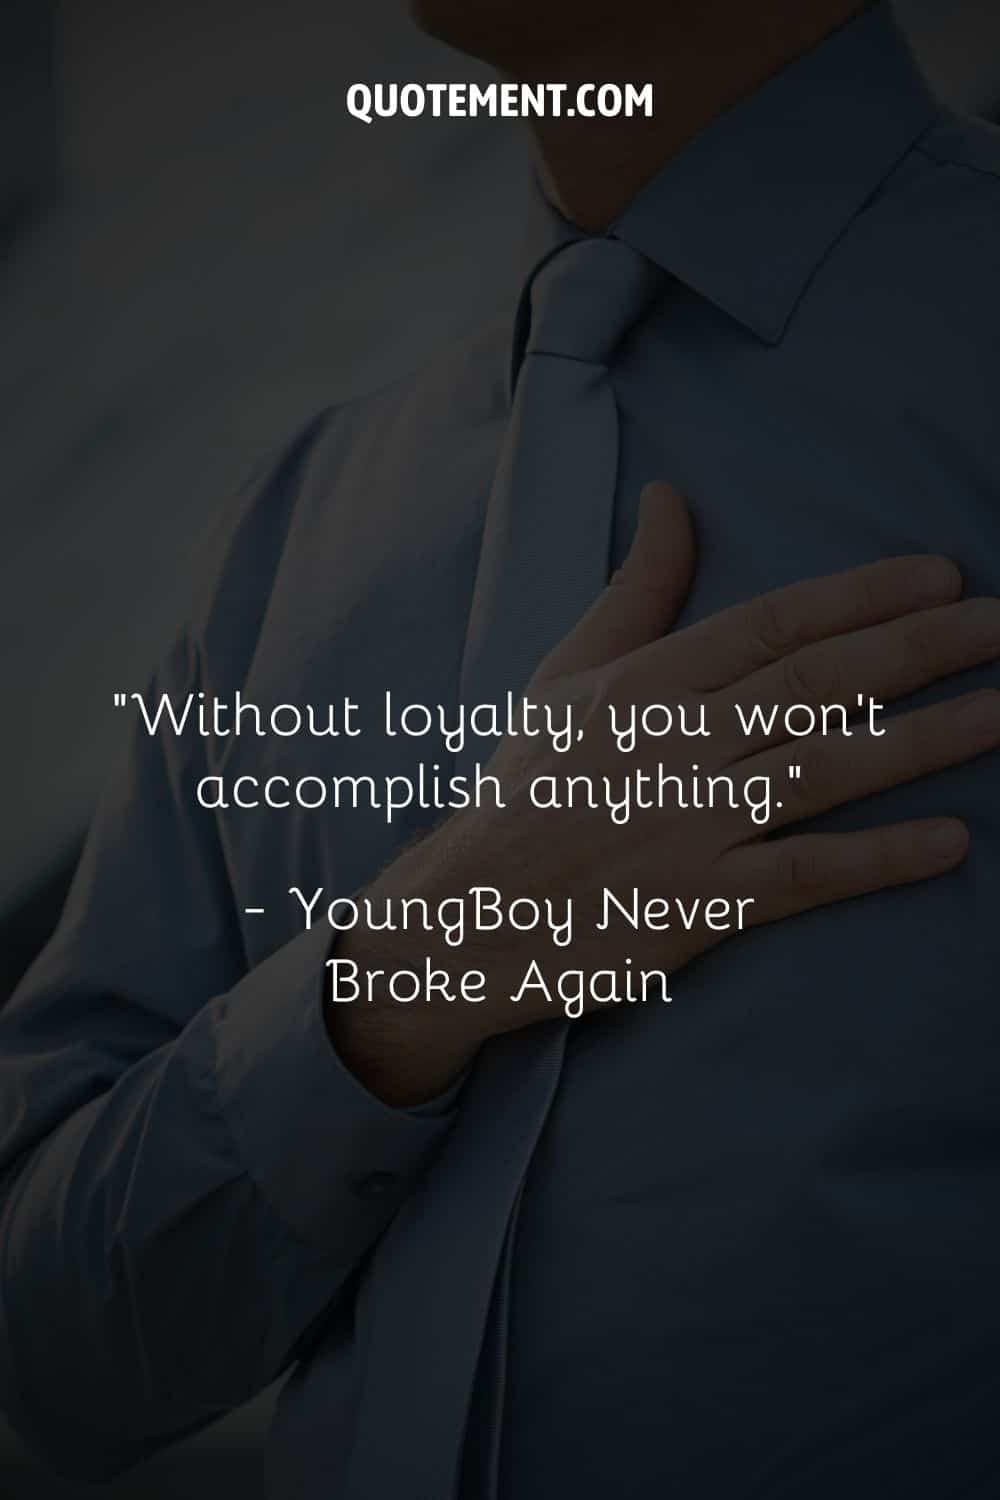 “Without loyalty, you won't accomplish anything.” ― YoungBoy Never Broke Again